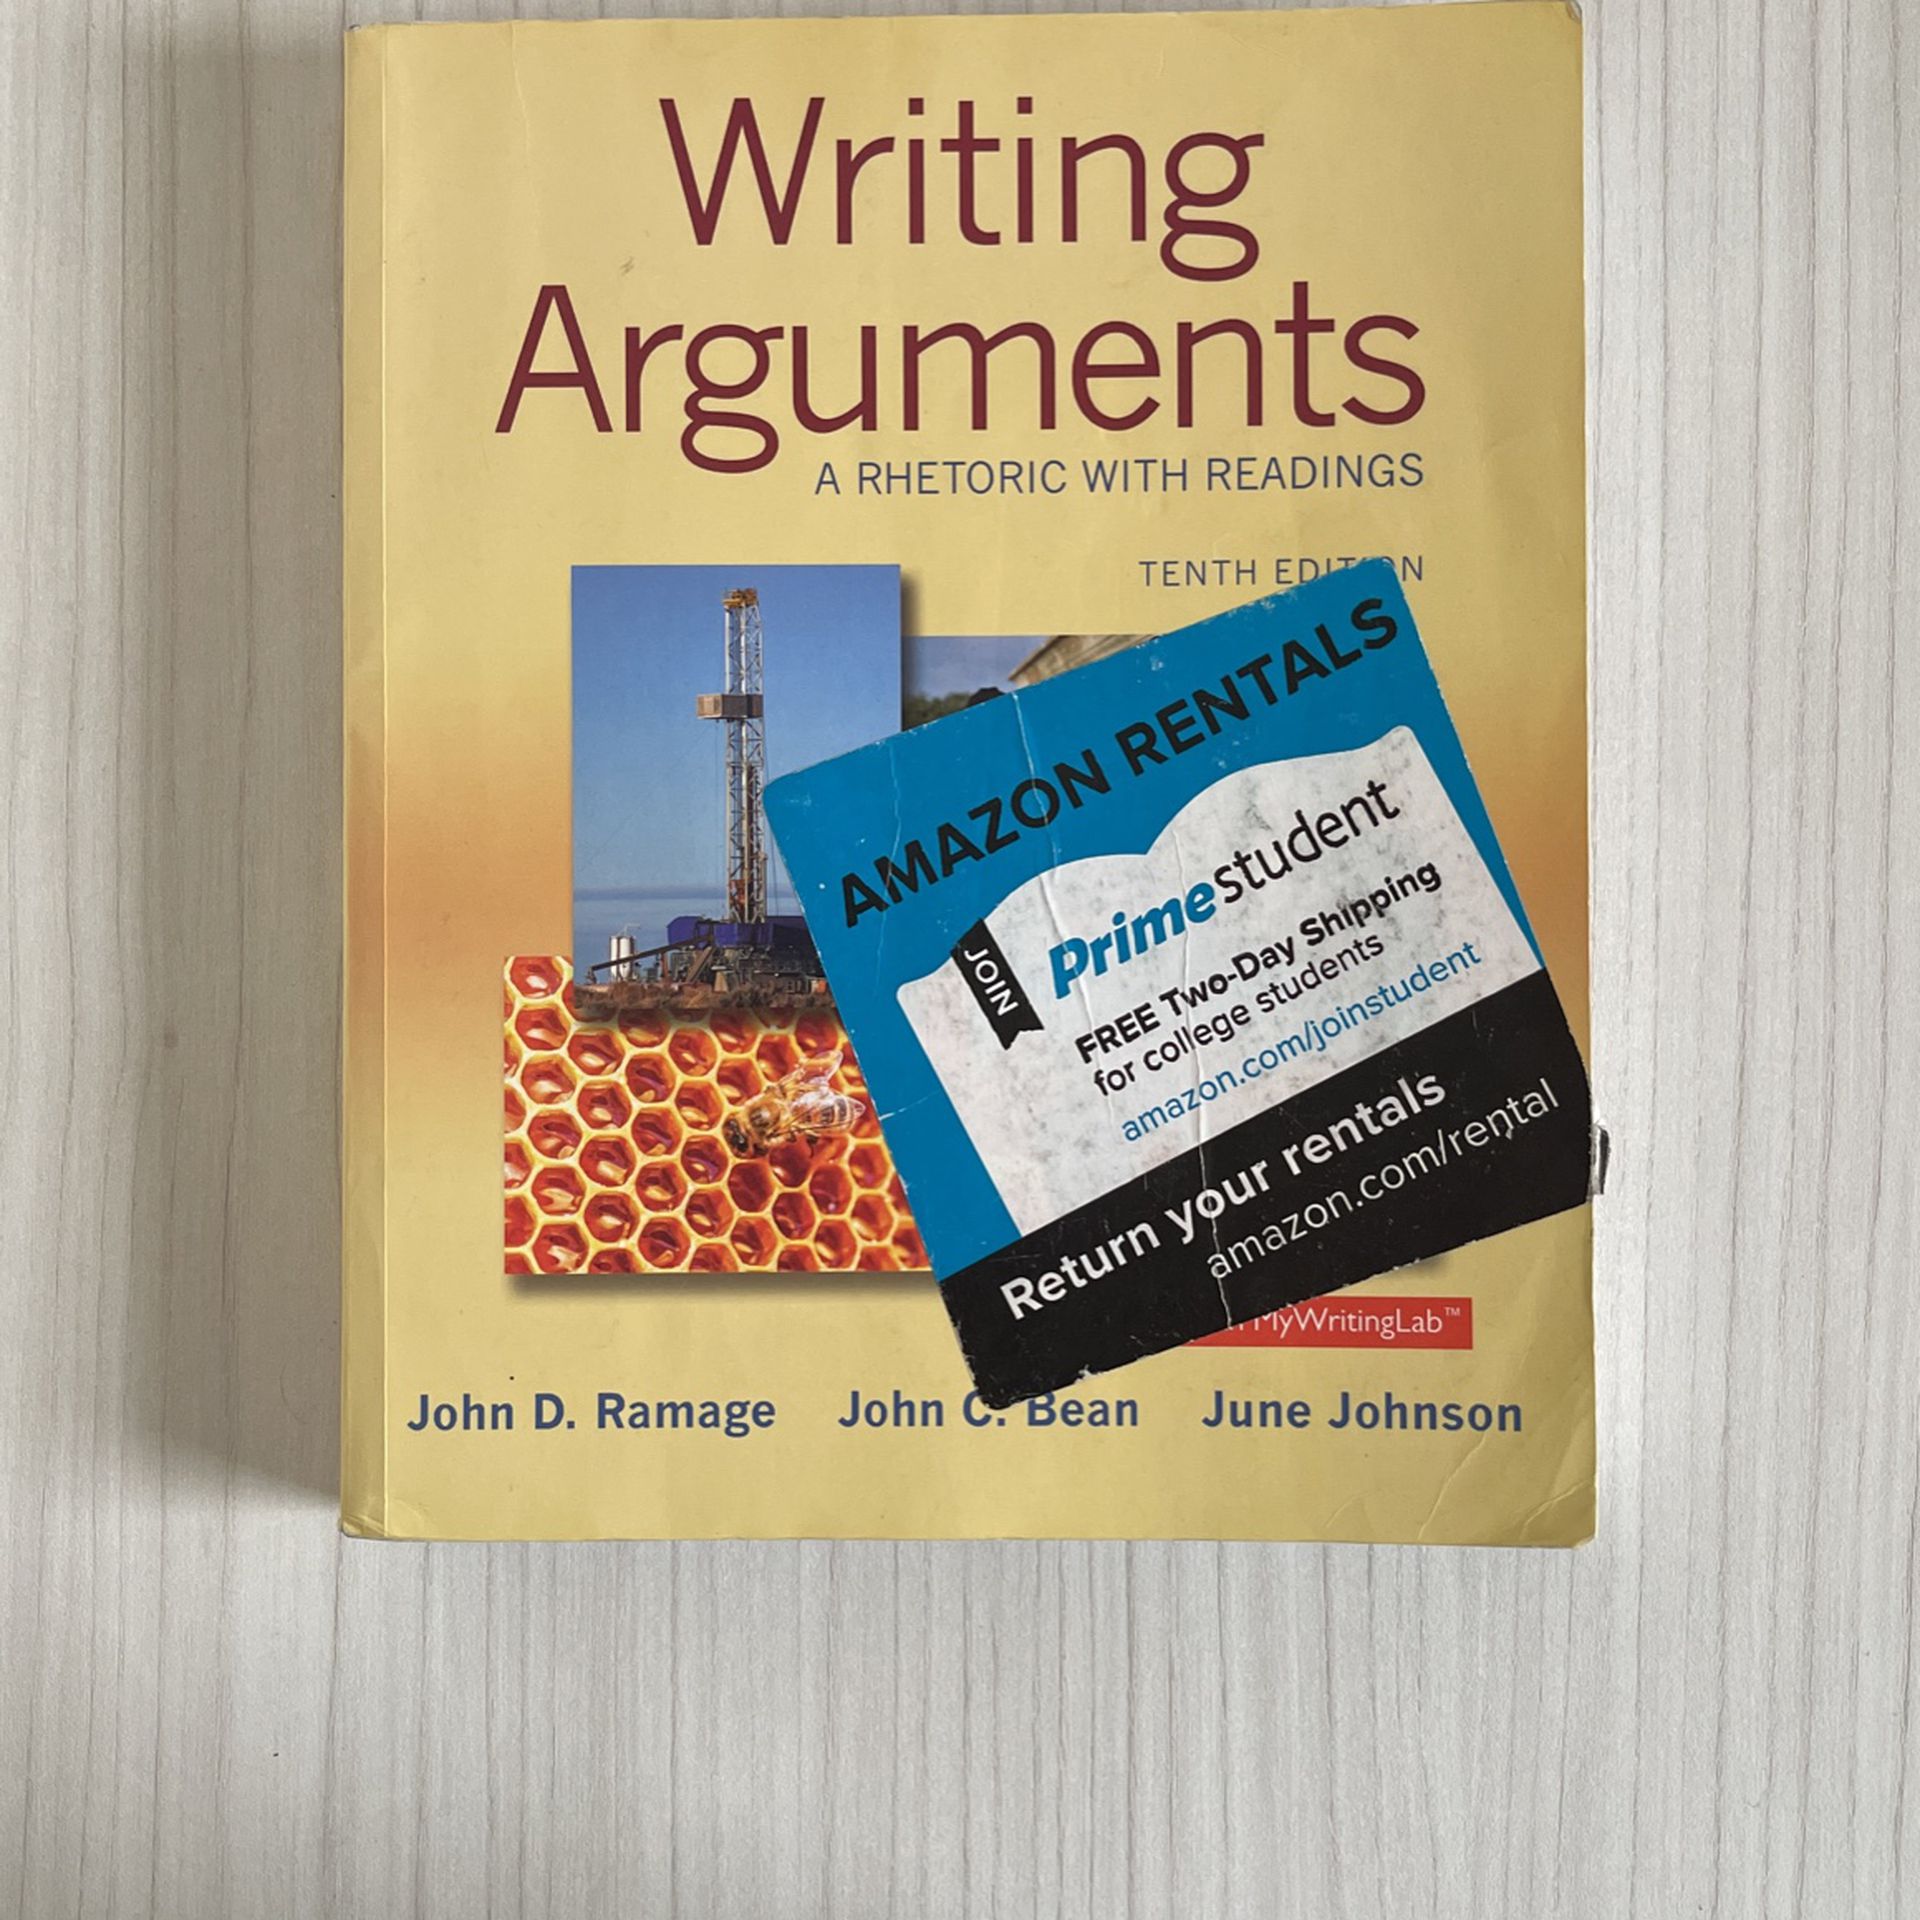 Writing Arguments - A Rhetoric With Readings 10th Edition 